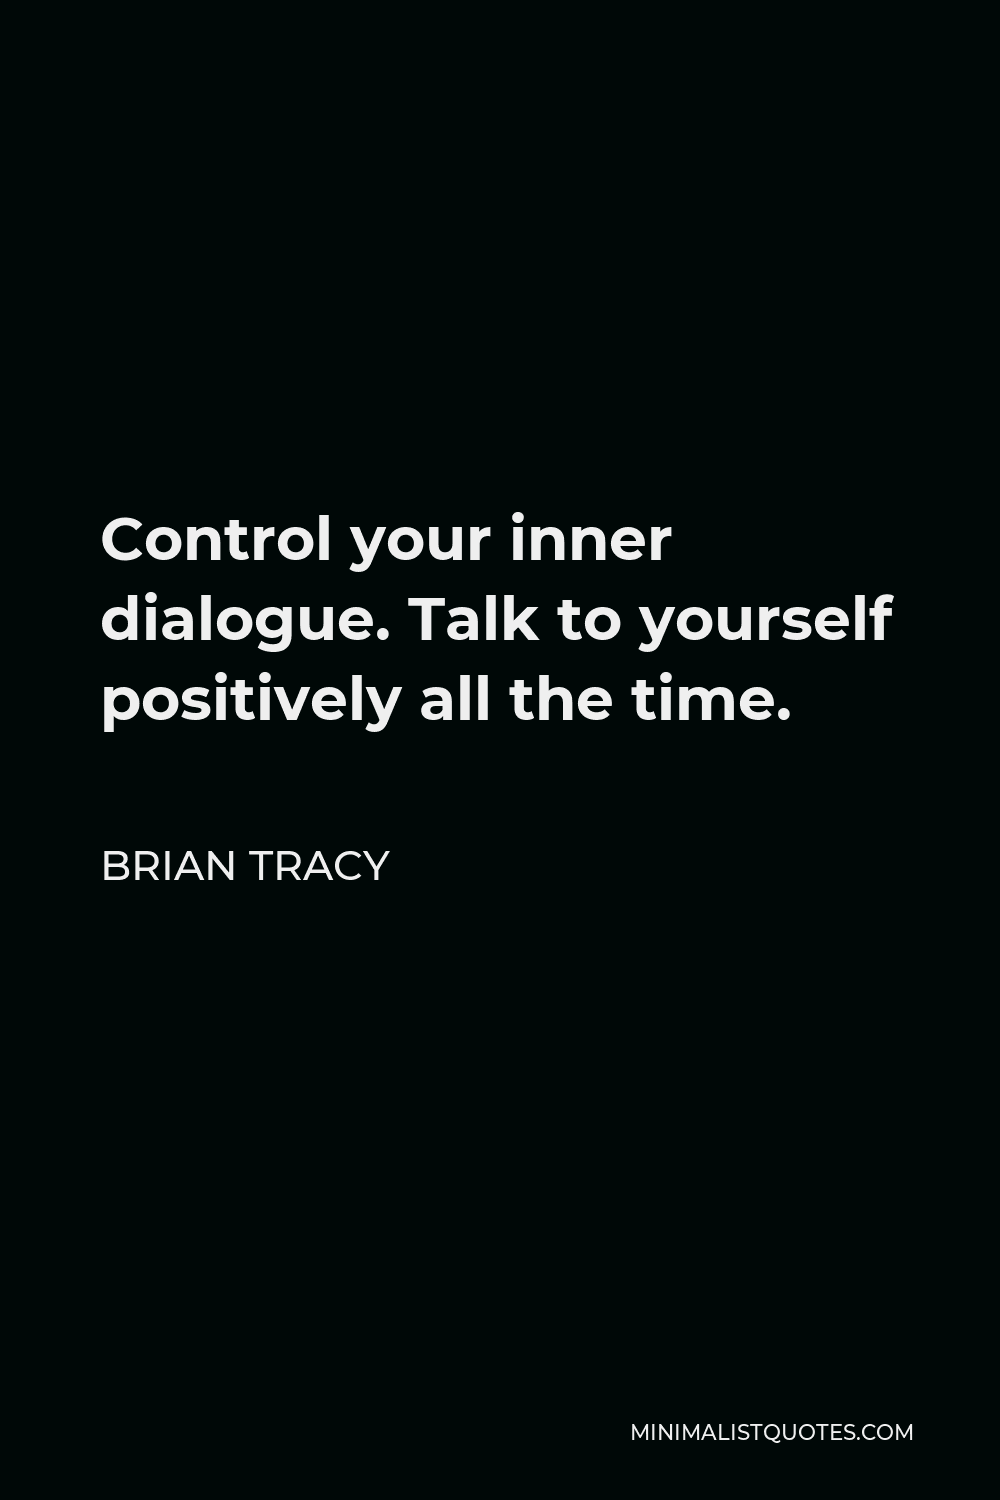 Brian Tracy Quote - Control your inner dialogue. Talk to yourself positively all the time.